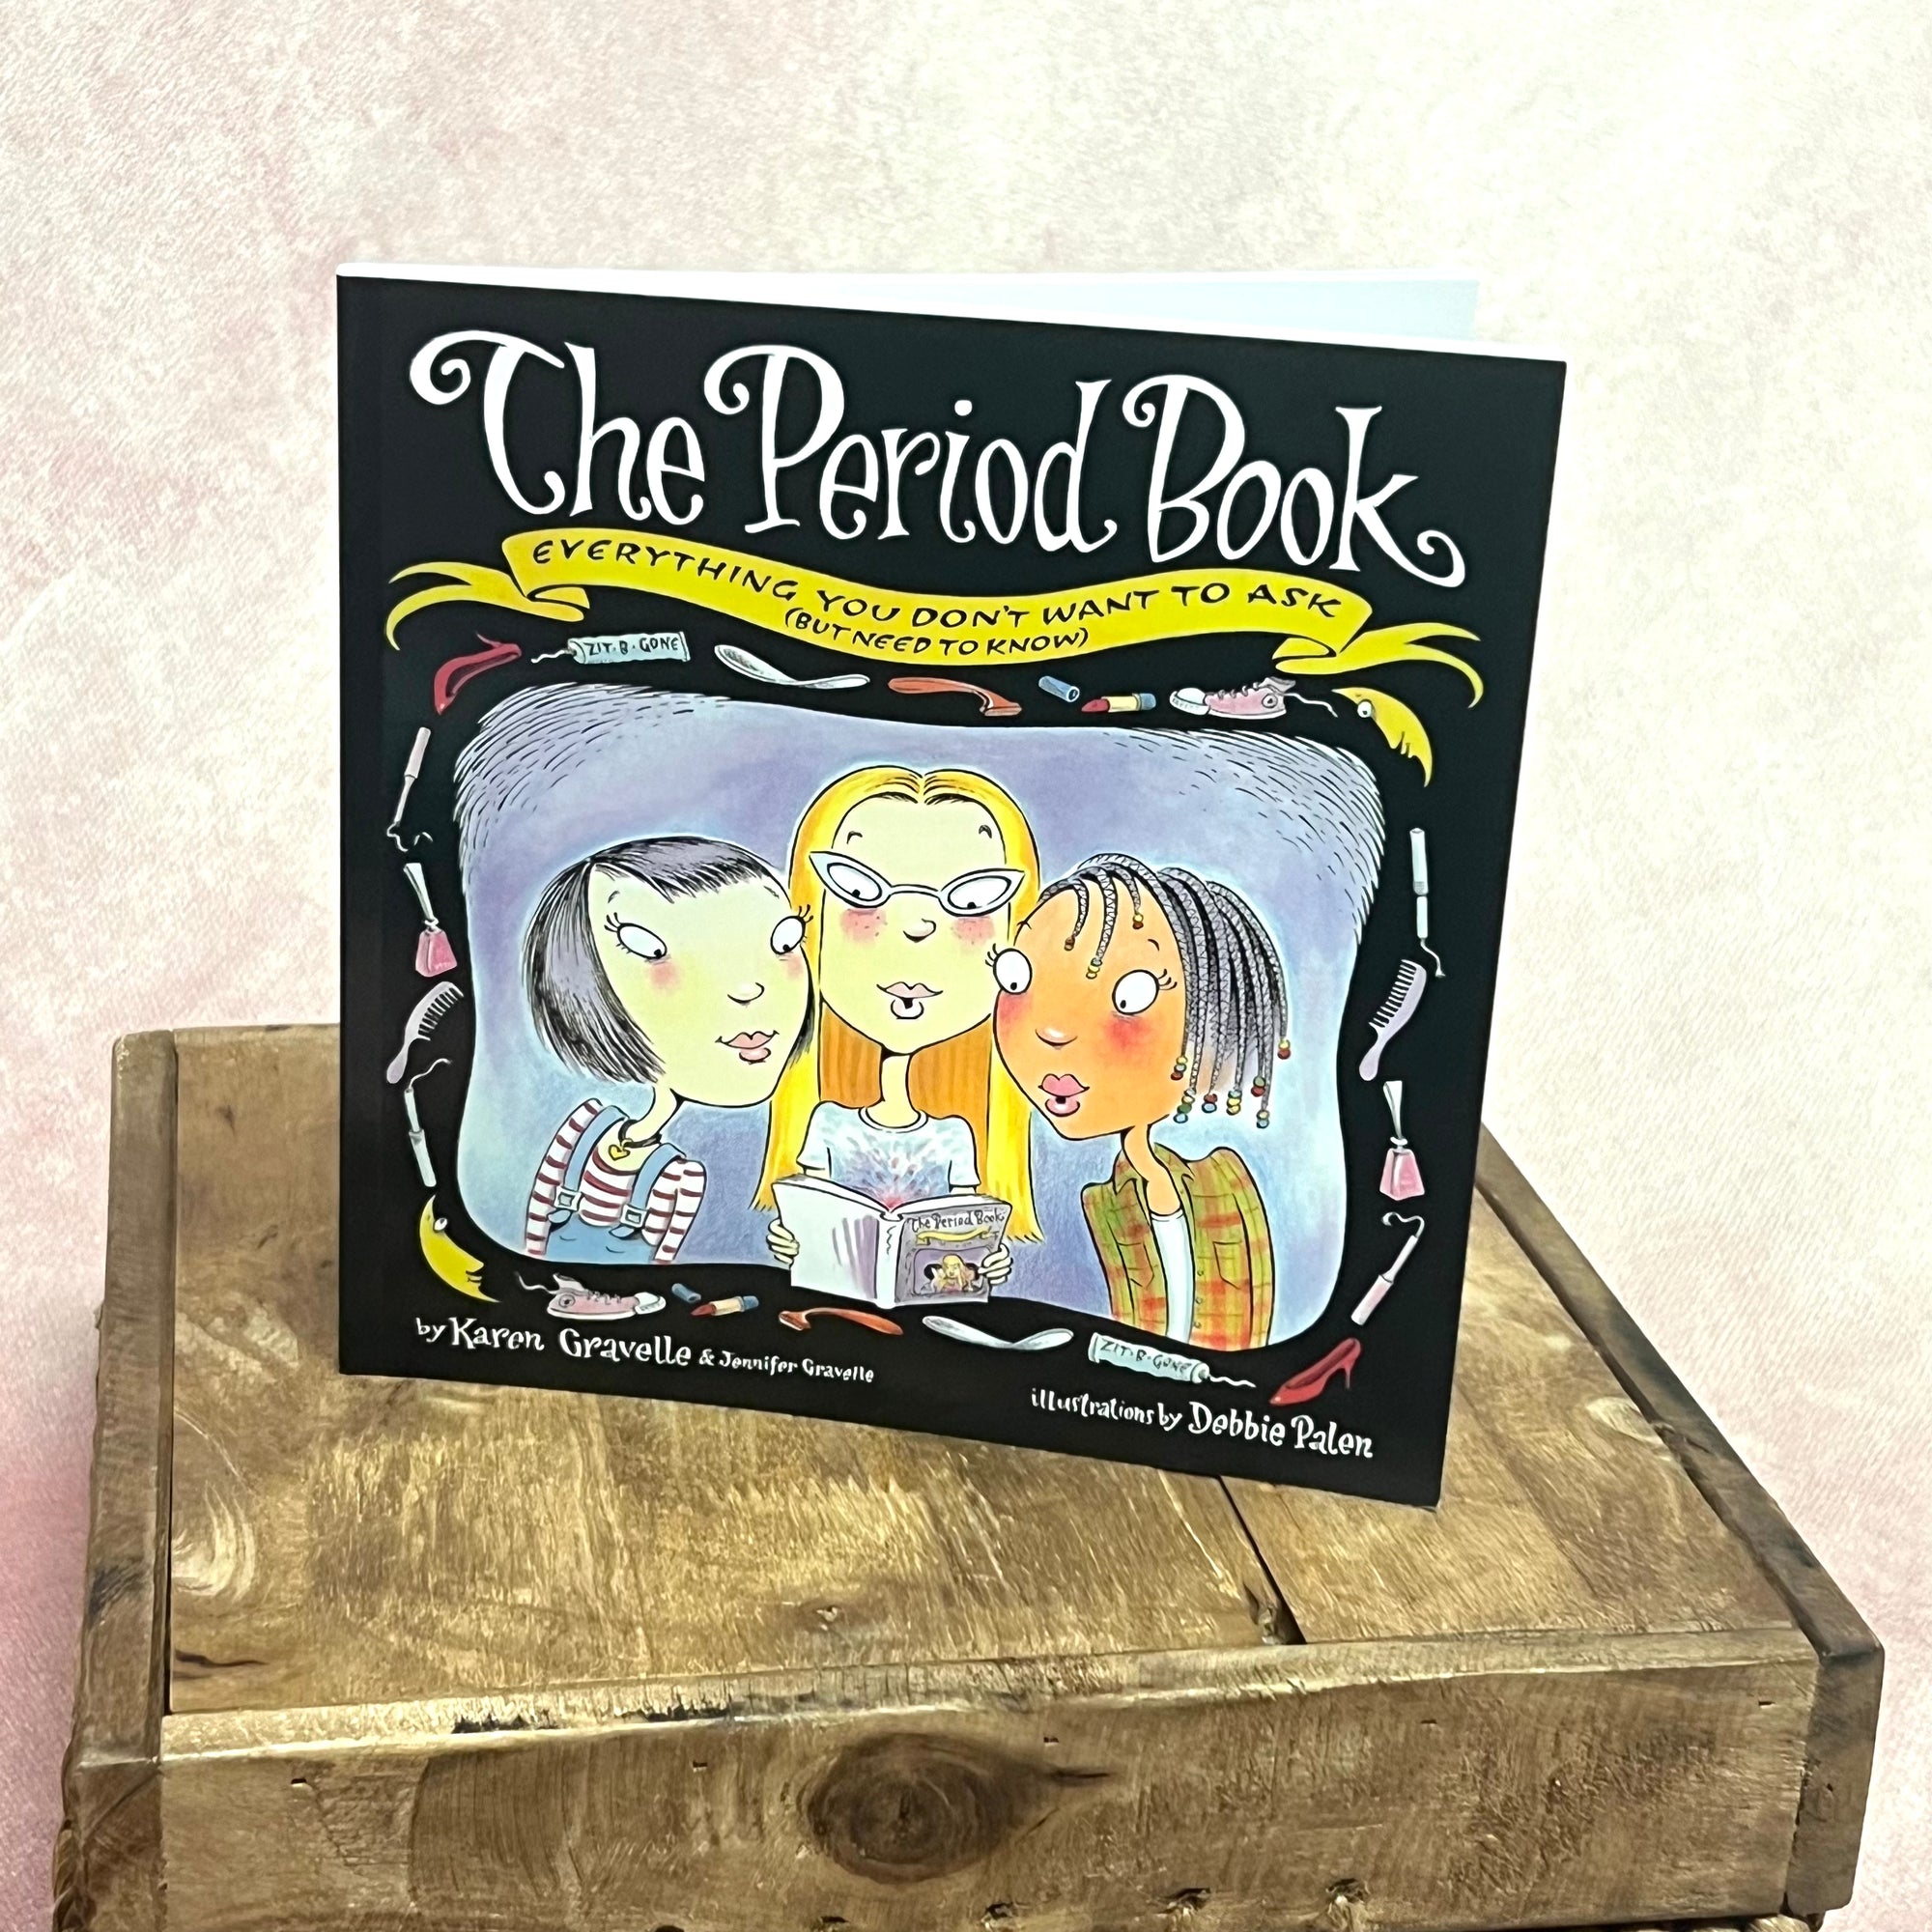 The Period Book by Karen Gravelle